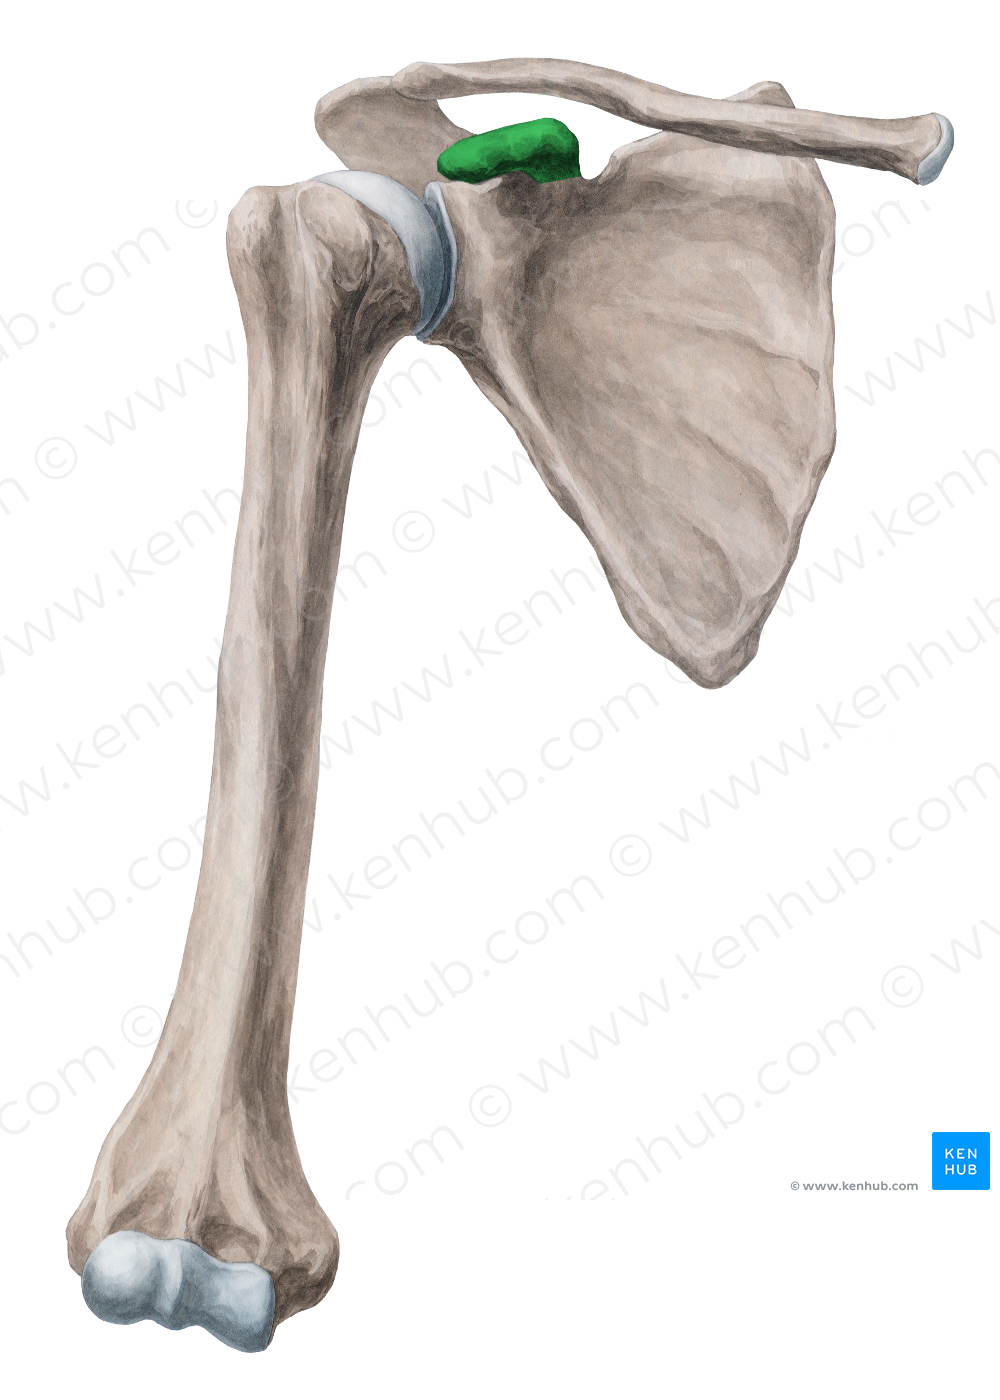 Coracoid process of scapula (#8198)